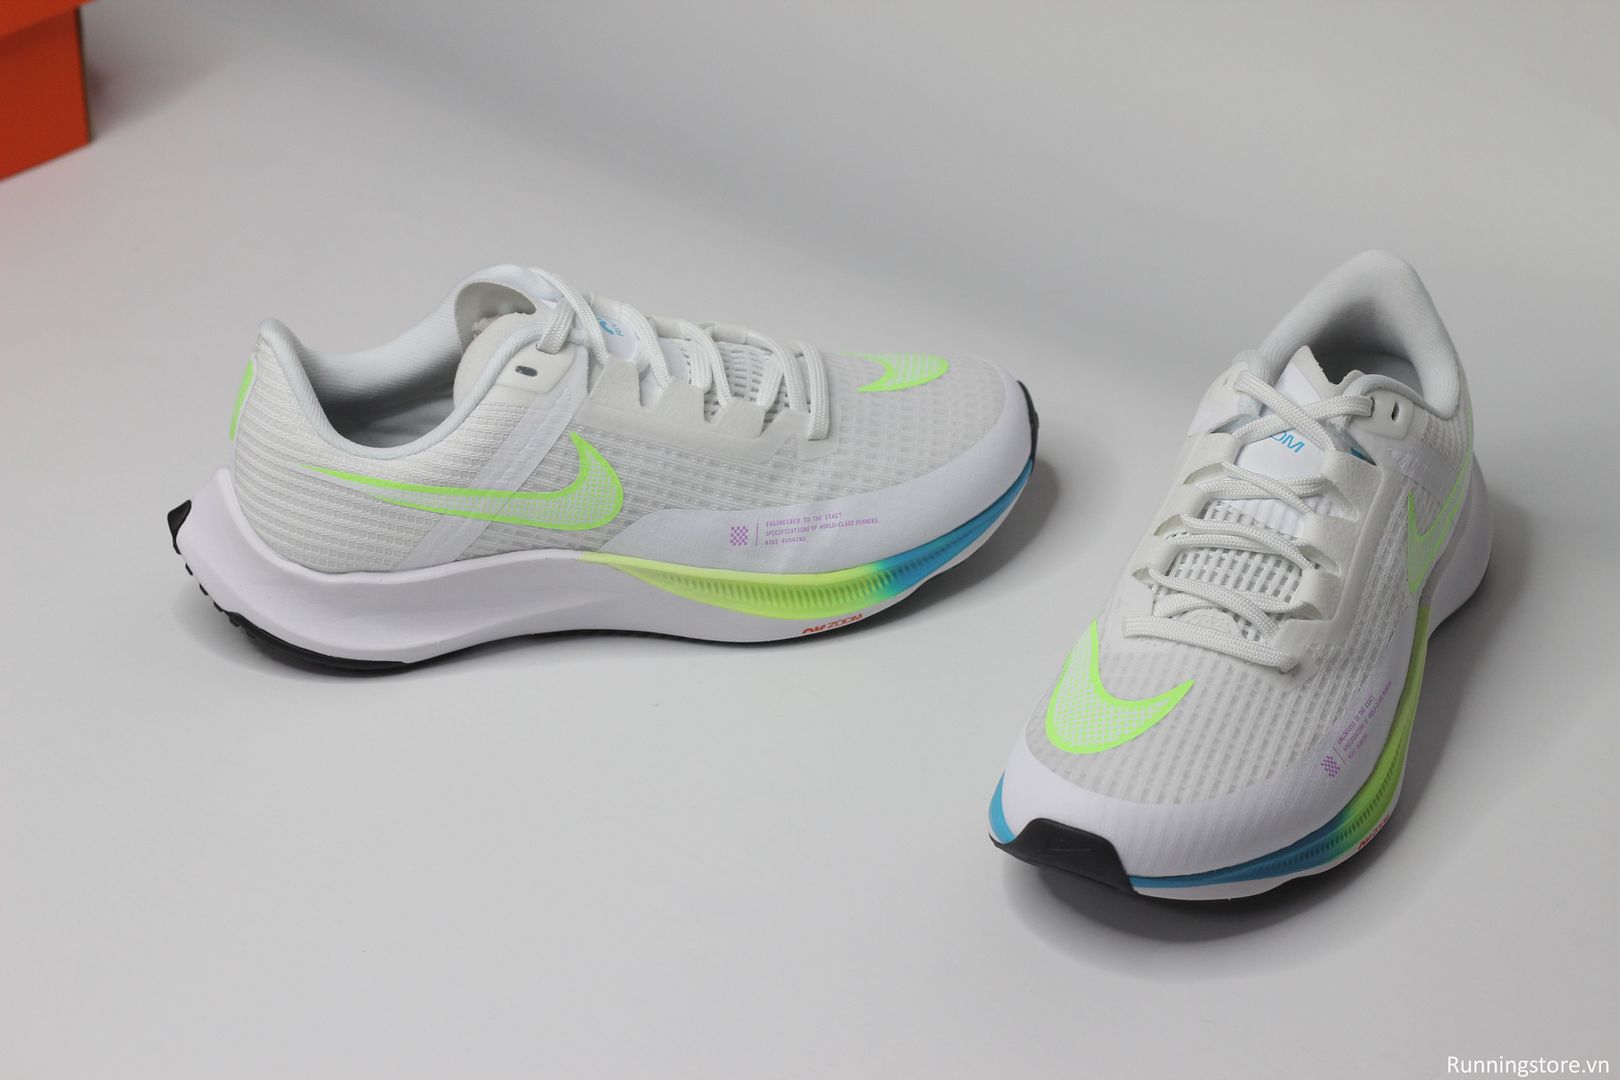 Nike Rival Fly 3 Air Zoom- White/ Blue Lightning/ Lime Blast CT2405-199